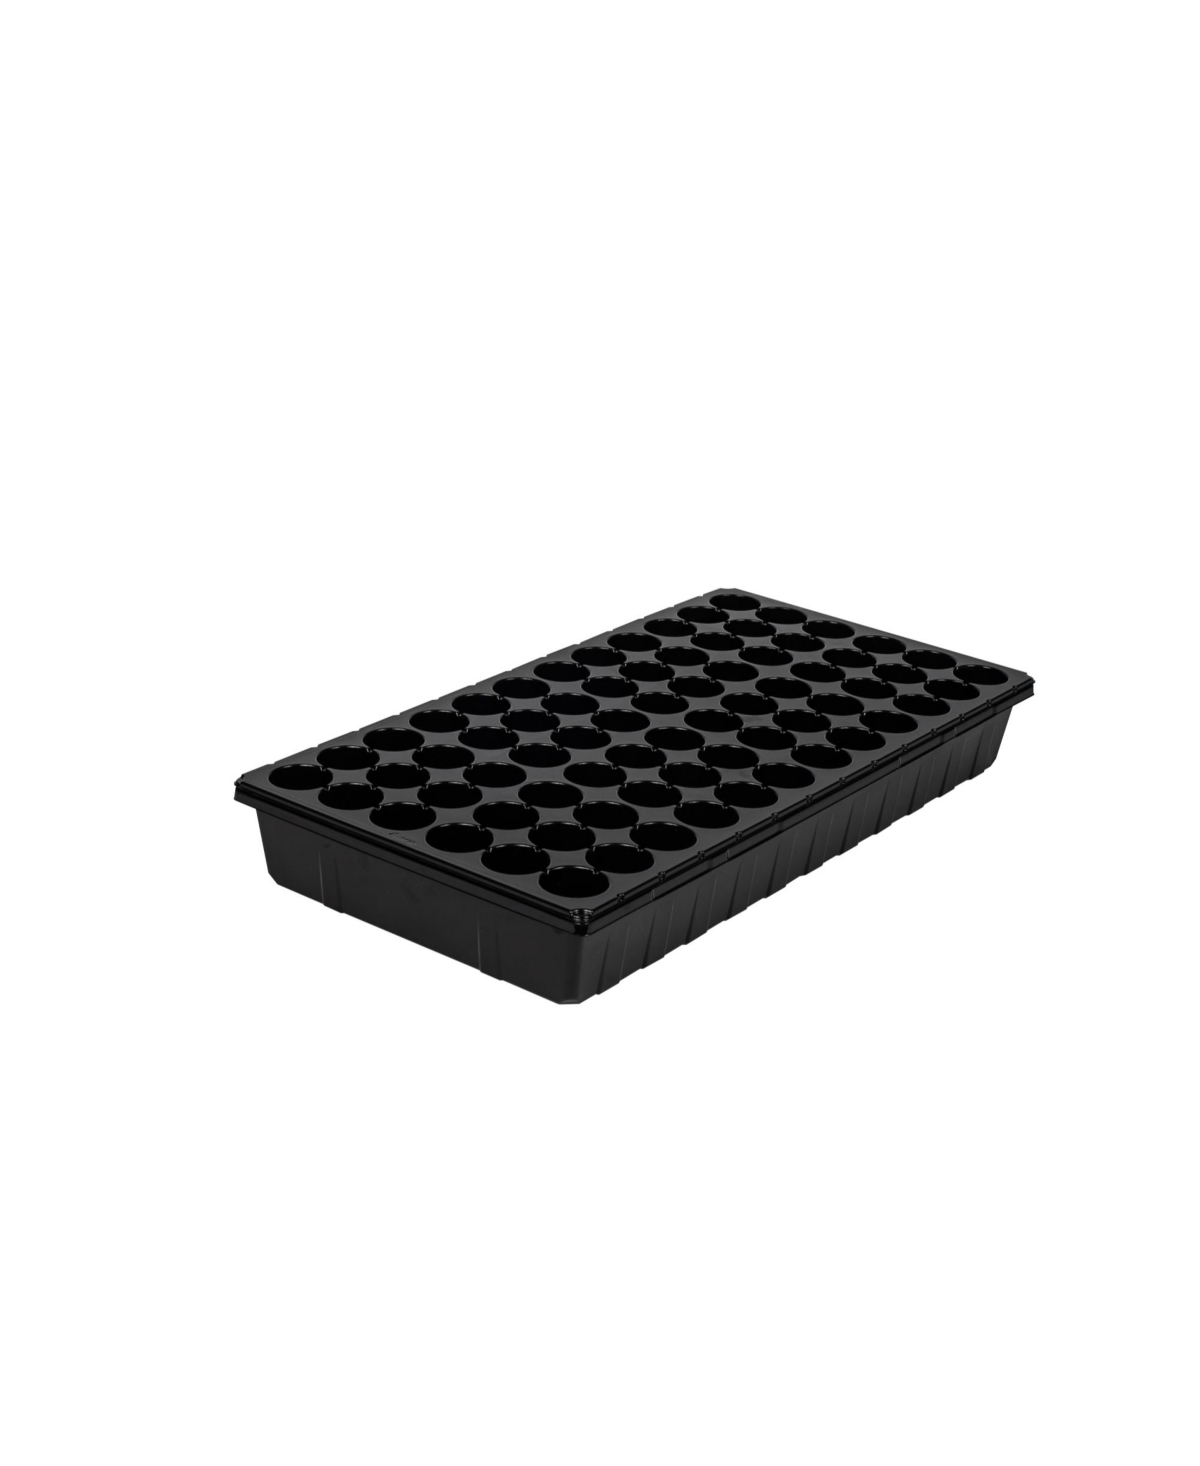 21 x 11in Round 72 Cell Insert Tray, Black - Black